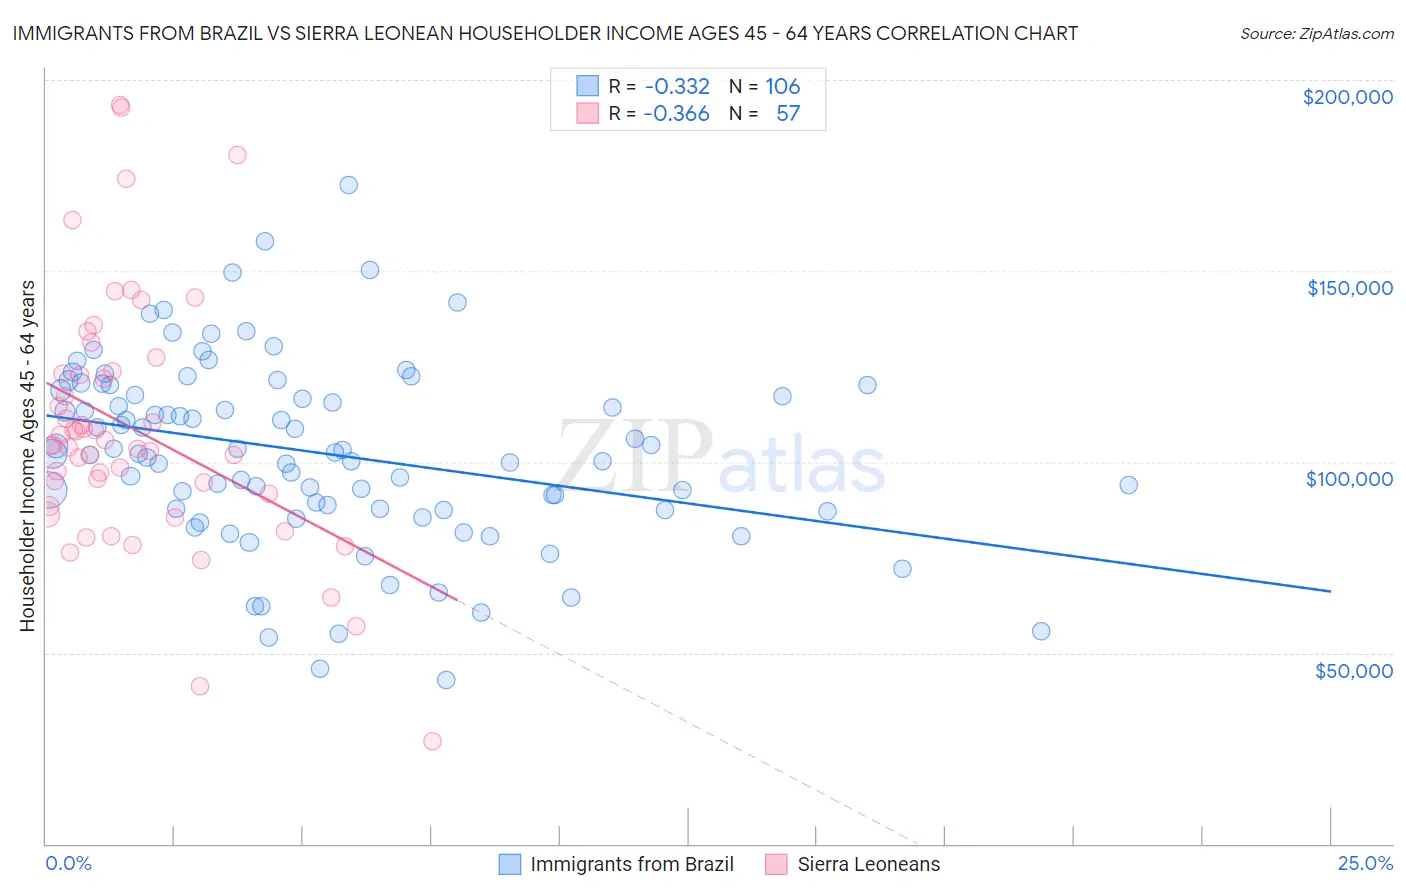 Immigrants from Brazil vs Sierra Leonean Householder Income Ages 45 - 64 years